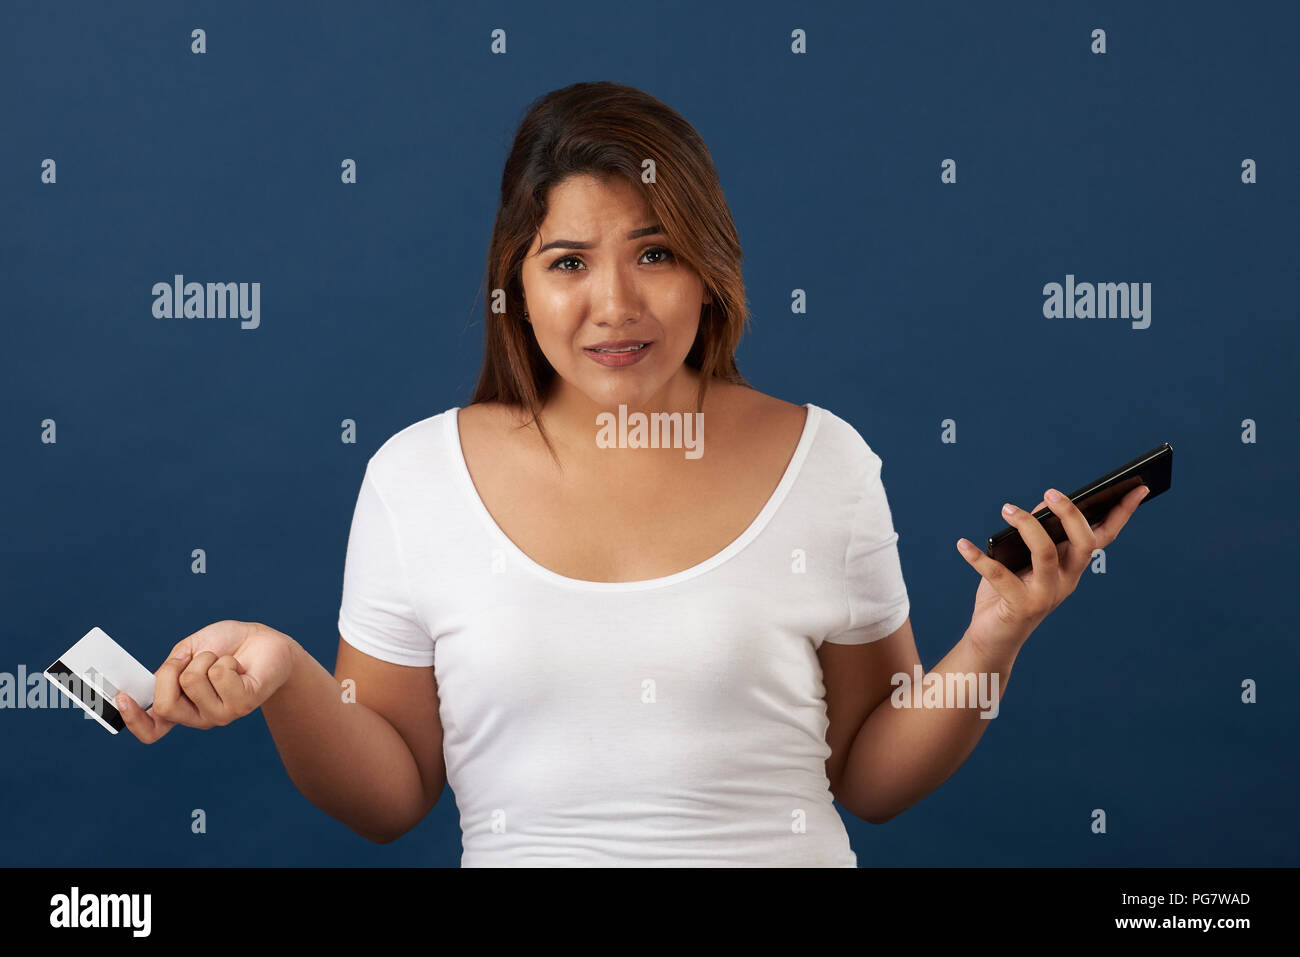 Upset woman with smartphone and credit card isolated on blue studio background Stock Photo